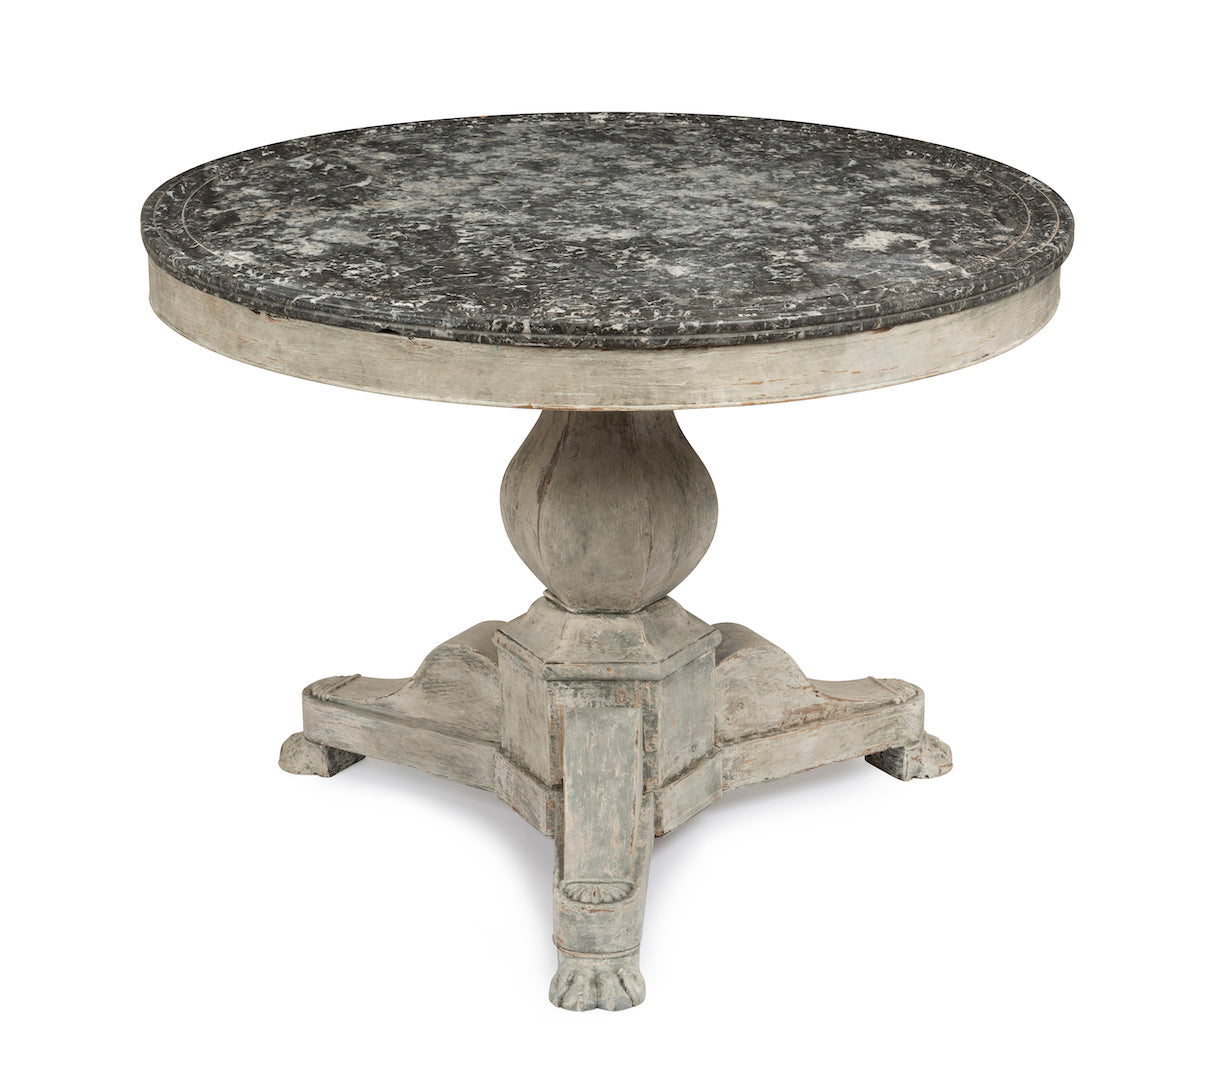 SOLD A very decorative French painted pedestal table with fine black marble top